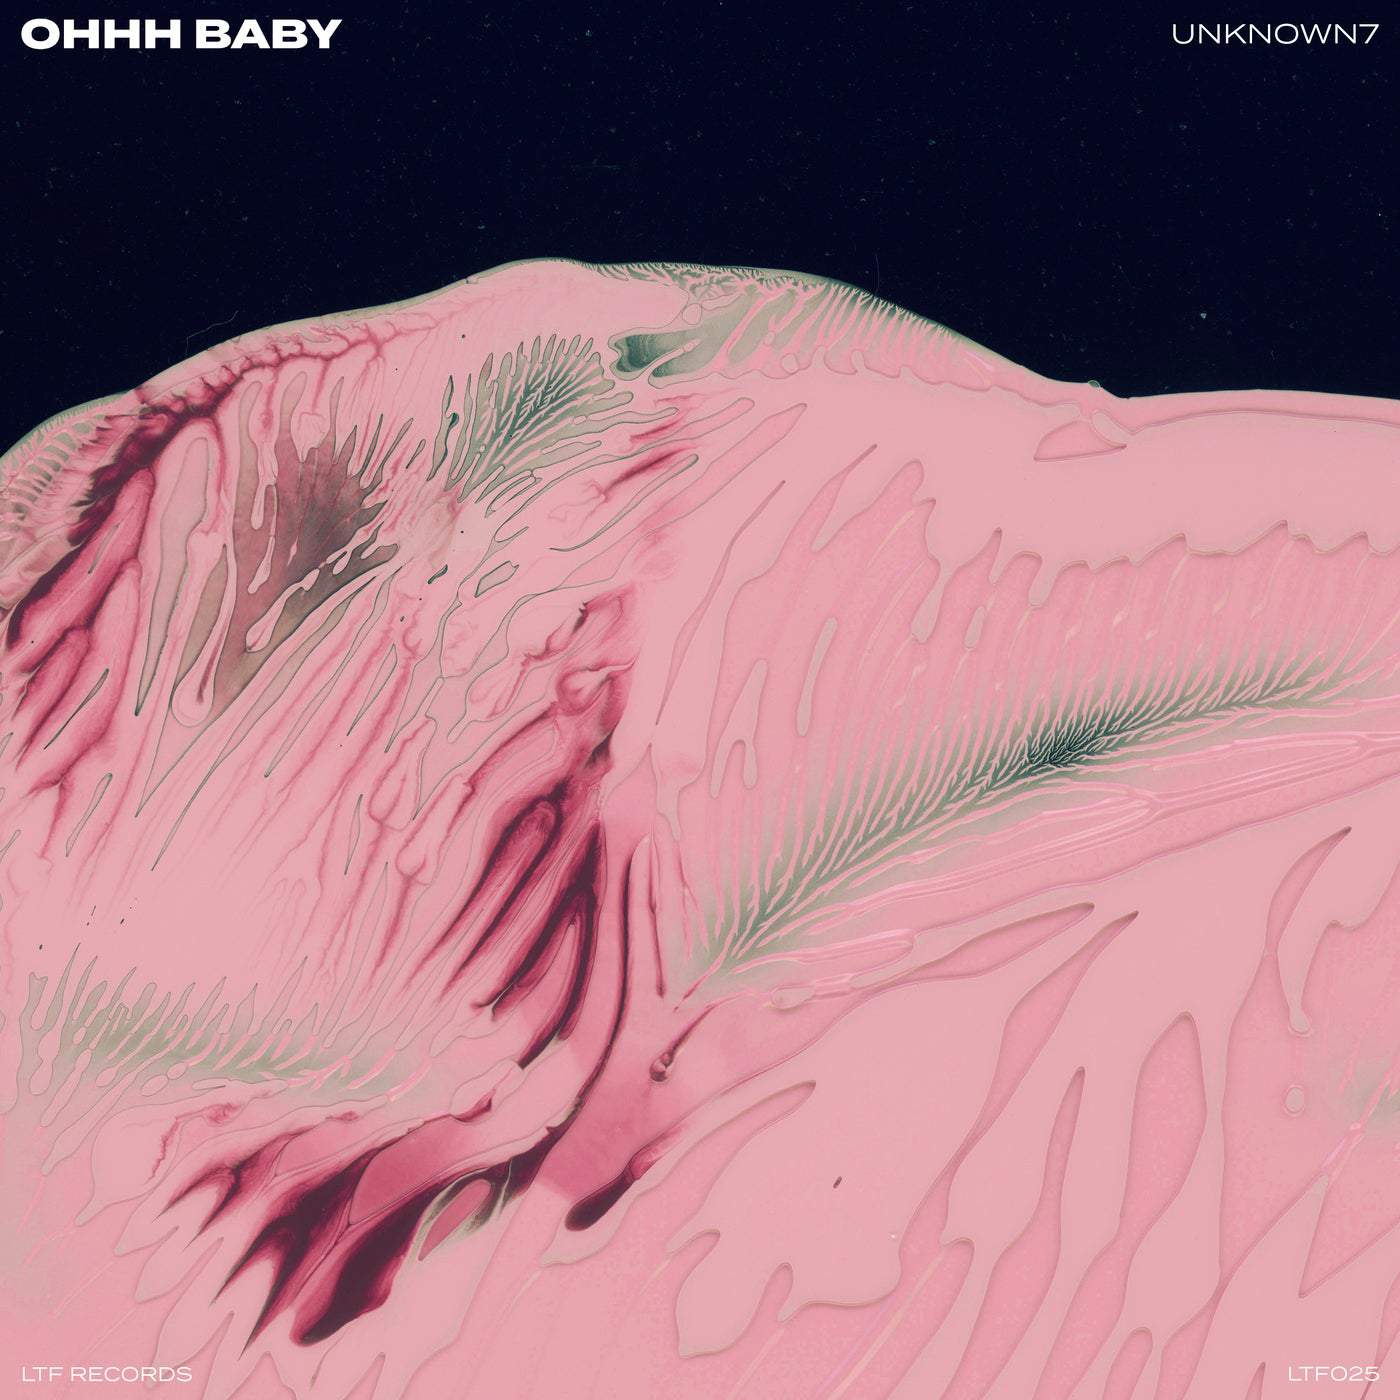 image cover: Unknown7 - Ohhh Baby - Extended Mix on LTF Records